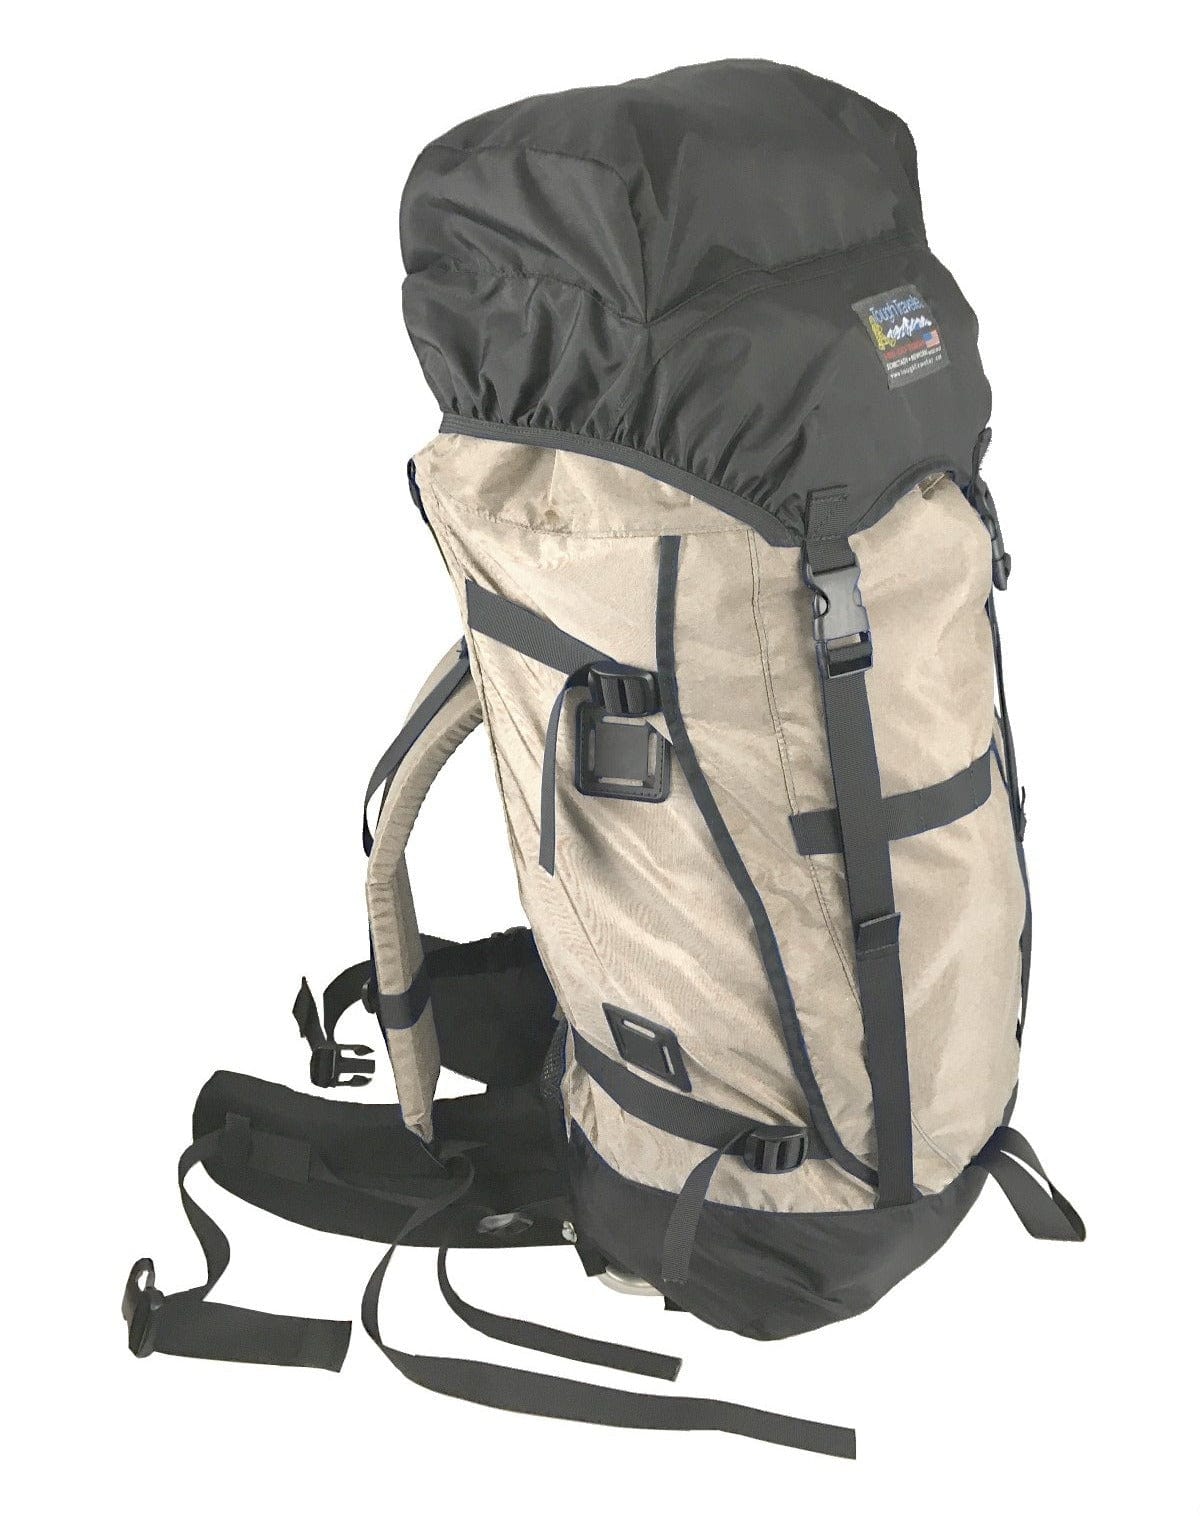 Made in USA CARRIER PACK Backpacks